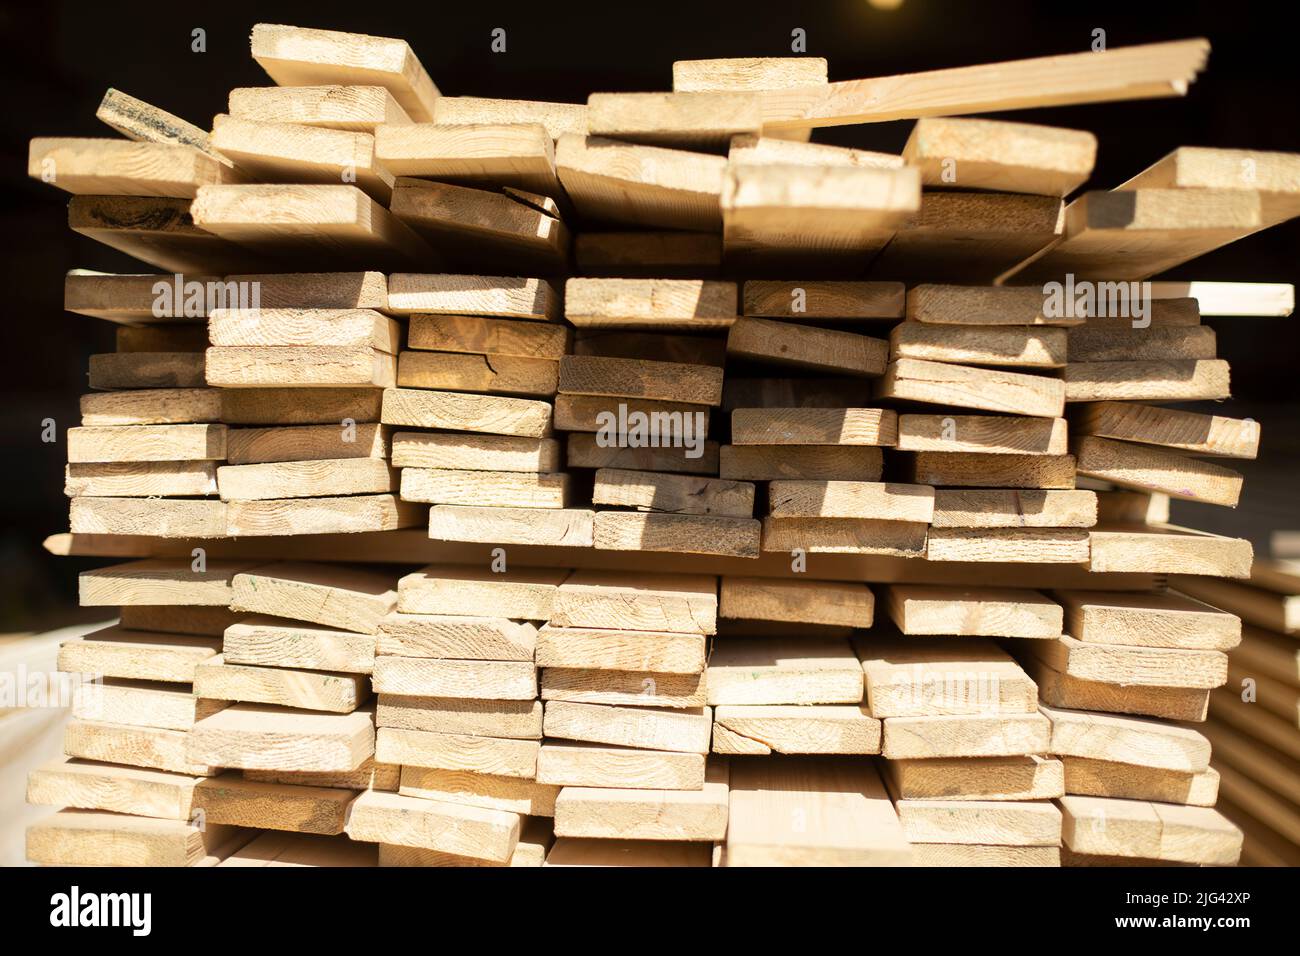 Boards in stock. Boards in sunlight. Lot of blanks made of wood. Stock Photo